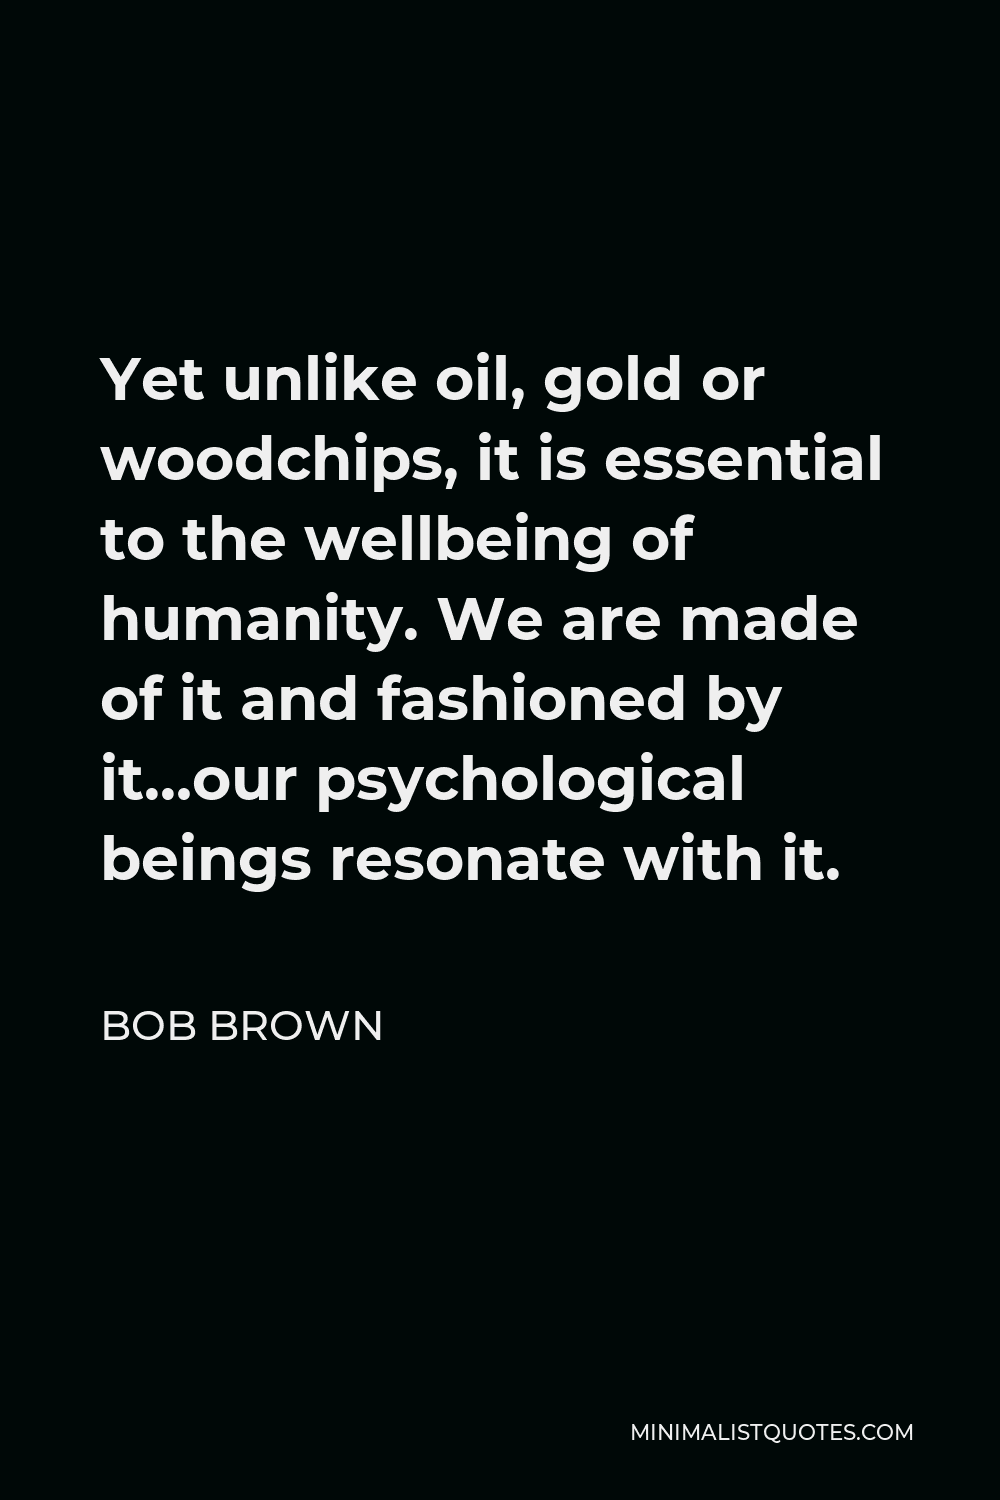 Bob Brown Quote - Yet unlike oil, gold or woodchips, it is essential to the wellbeing of humanity. We are made of it and fashioned by it…our psychological beings resonate with it.